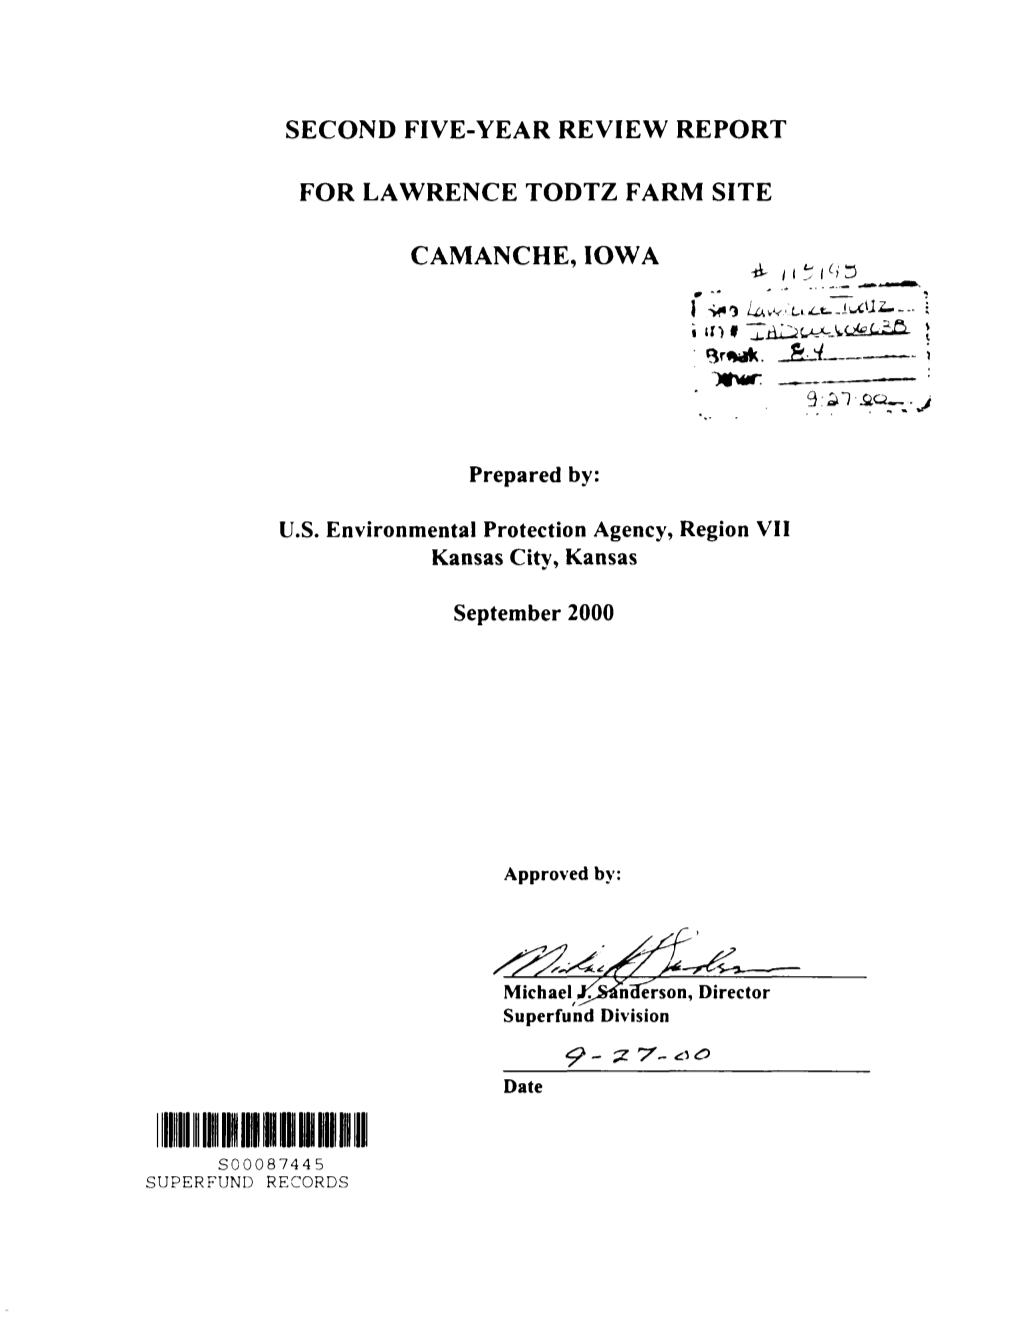 Second Five-Year Review Report for Lawrence Todtz Farm Site Camanche, Iowa